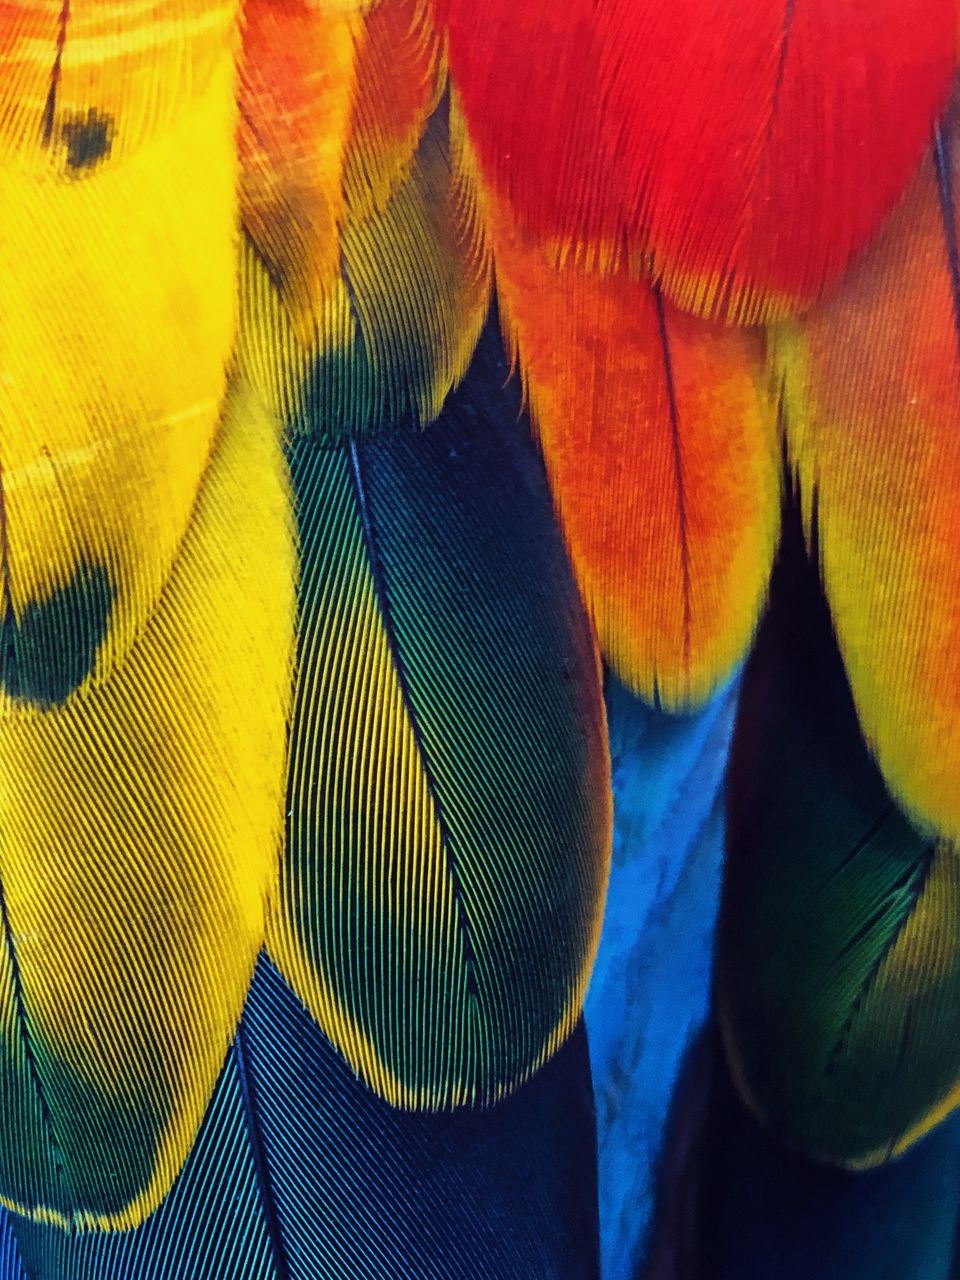 A close up of a parrots feathers, showing blue, red, and yellow tones.